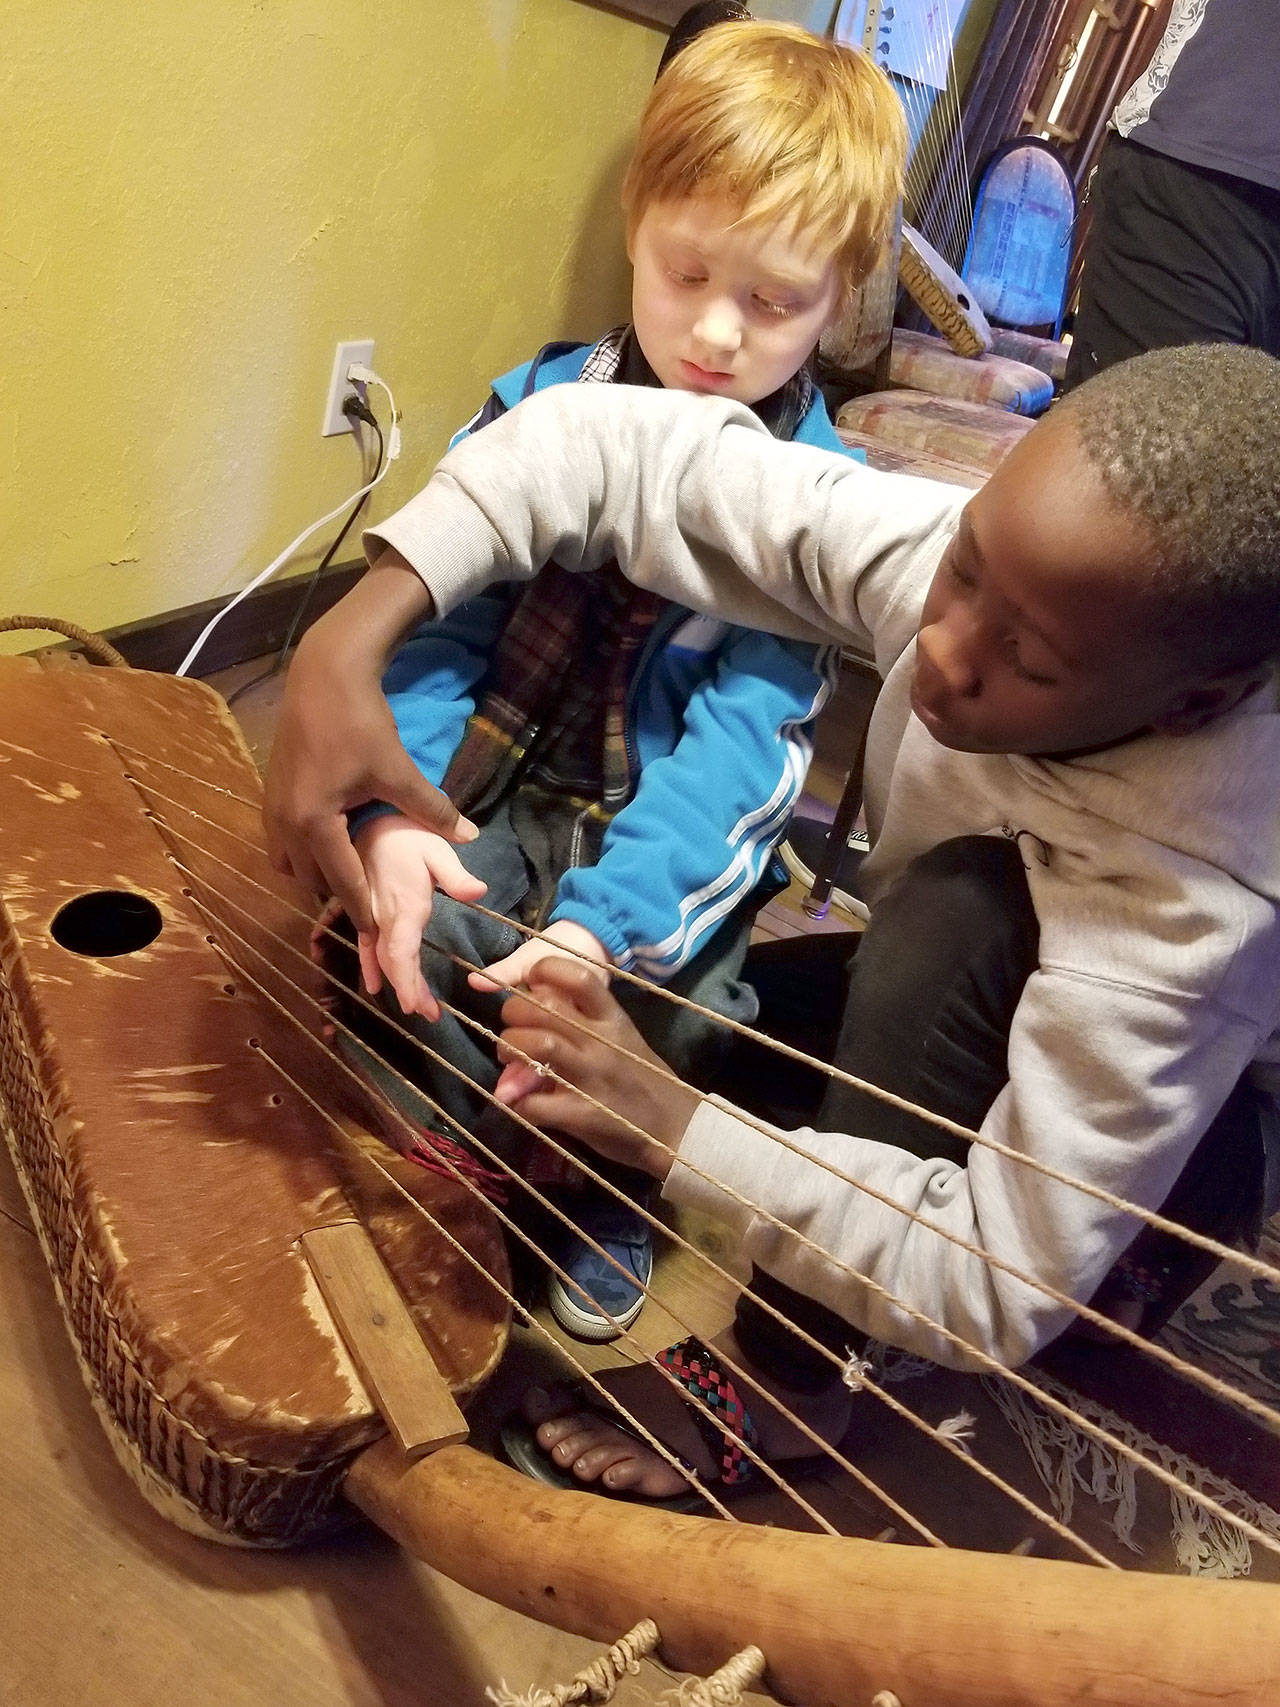 Erick Ngabezaaya (right) shows where to properly place fingers on the Ugandan wooden instrument called an adungo to Shane Astor of Everett.